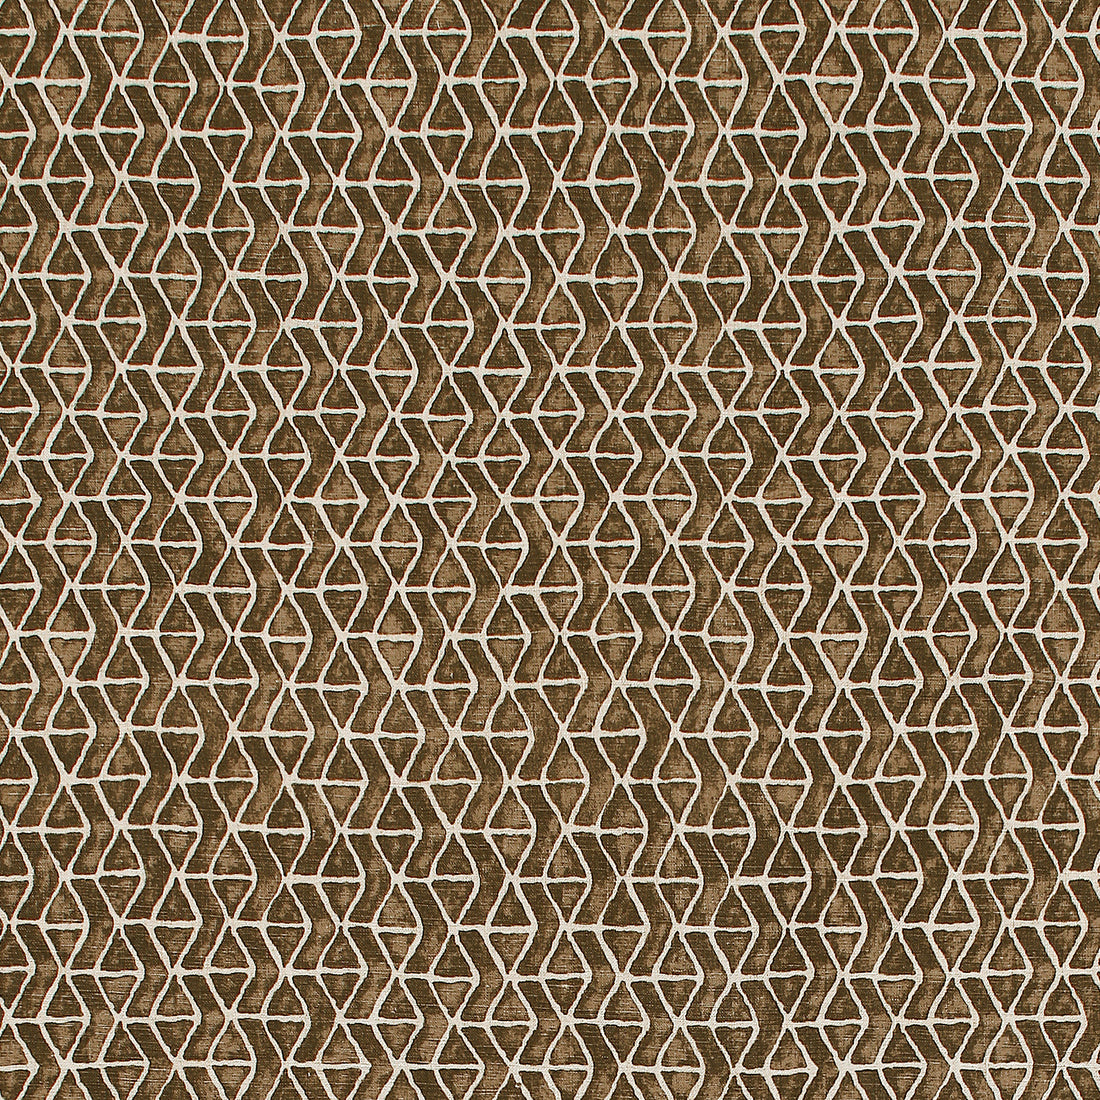 Stony Brook fabric in brown color - pattern number F942005 - by Thibaut in the Sojourn collection